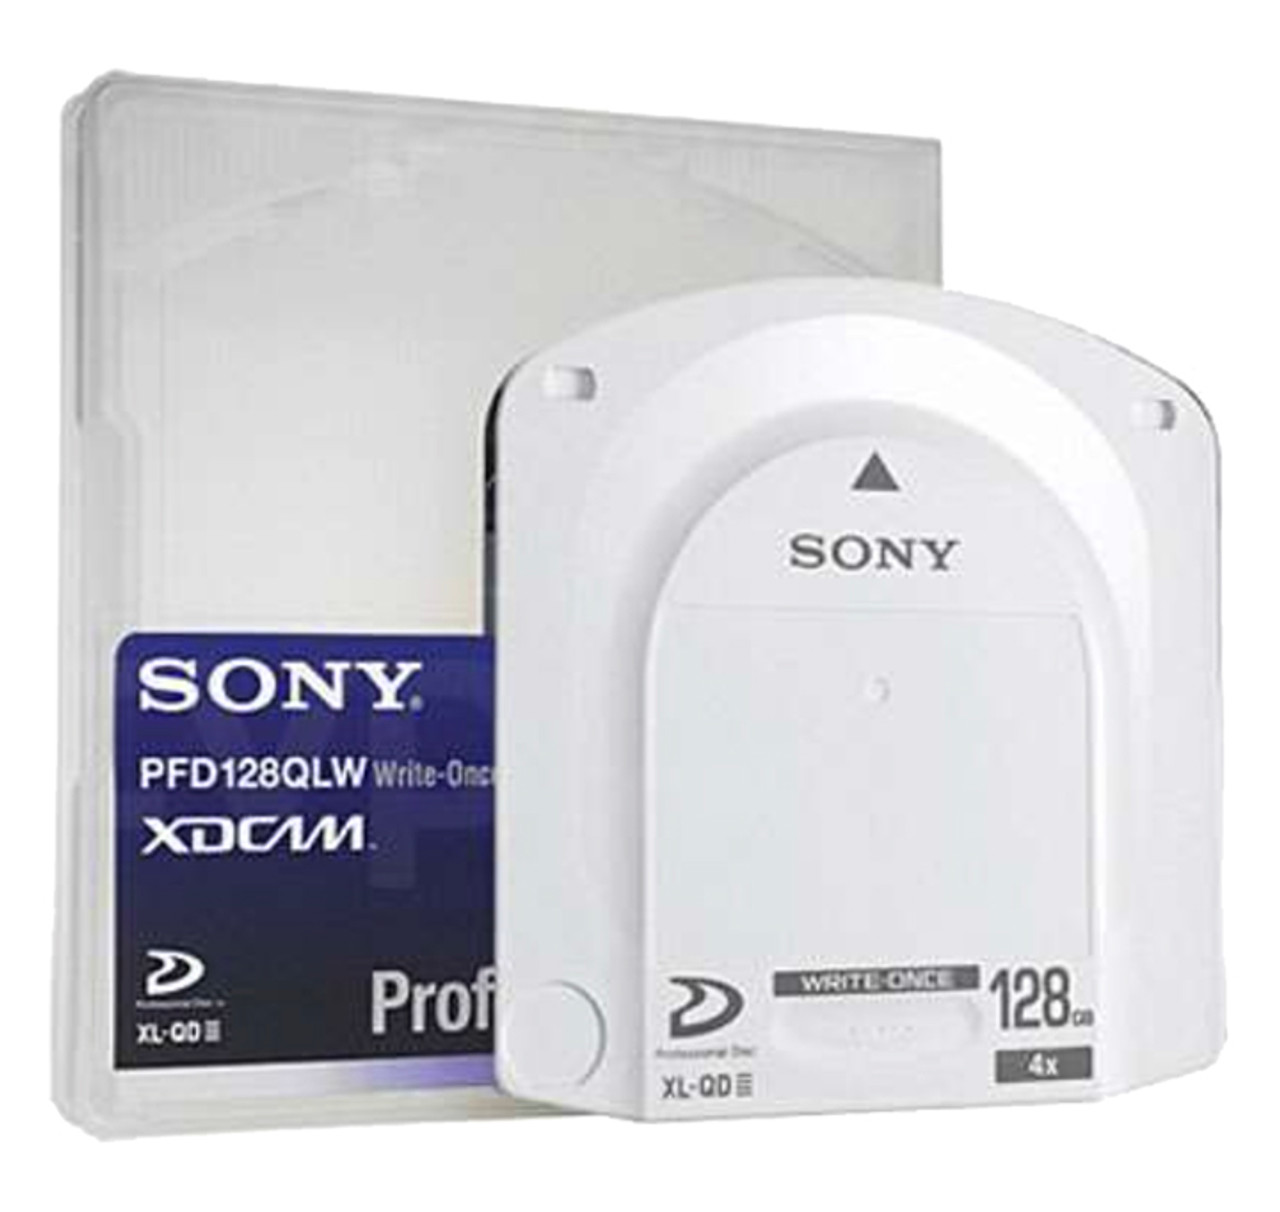 Sony 23GB XDCAM Disc Single Layer Formatted - PFD23AX